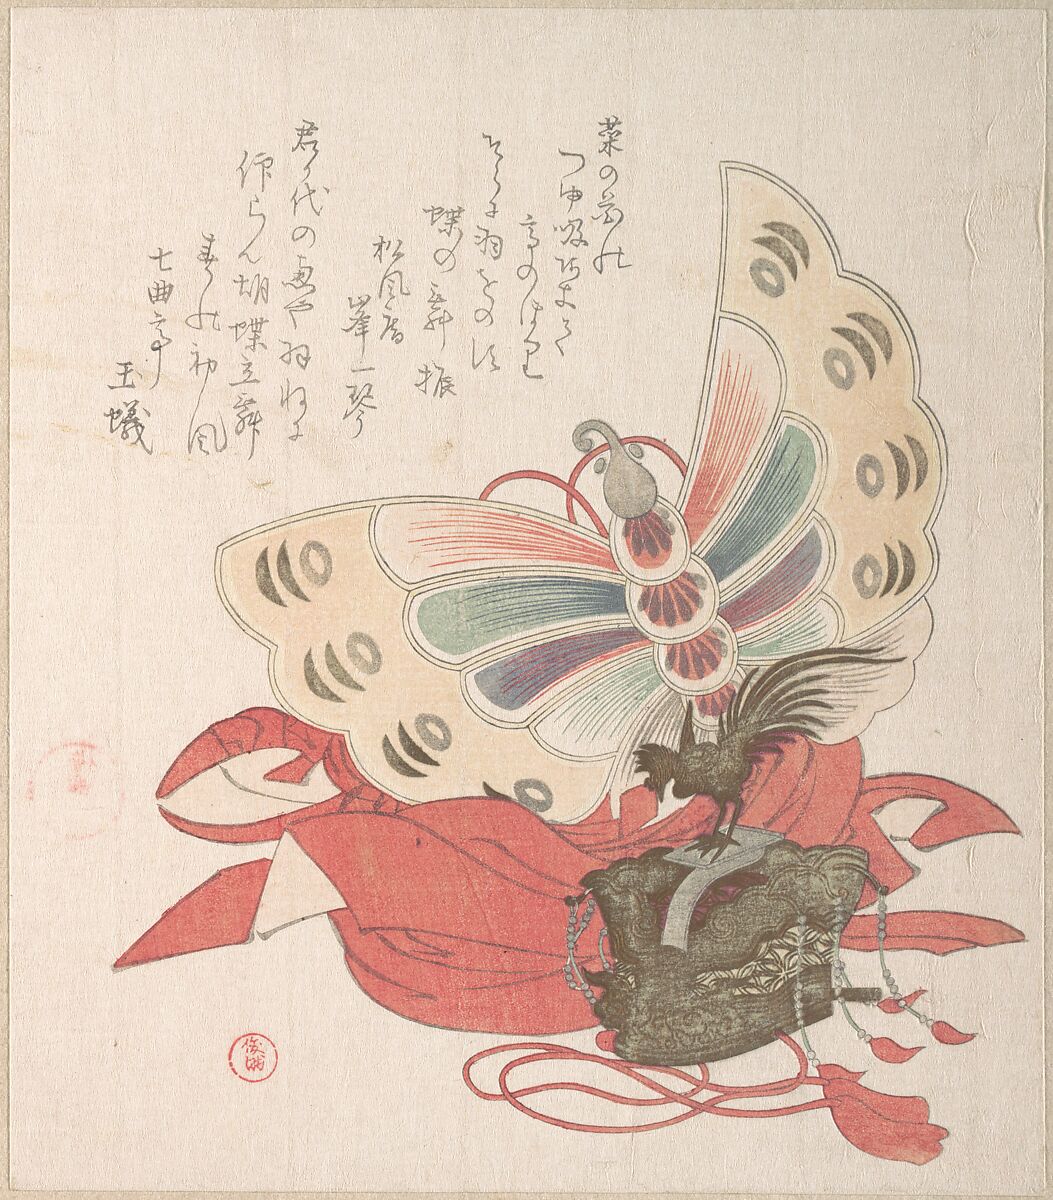 Spring Rain Collection (Harusame shū), vol. 2: Costume for the Butterfly Dance (Kochō no mai), Kubo Shunman (Japanese, 1757–1820), Privately published woodblock prints (surimono) mounted in an album; ink and color on paper, Japan 